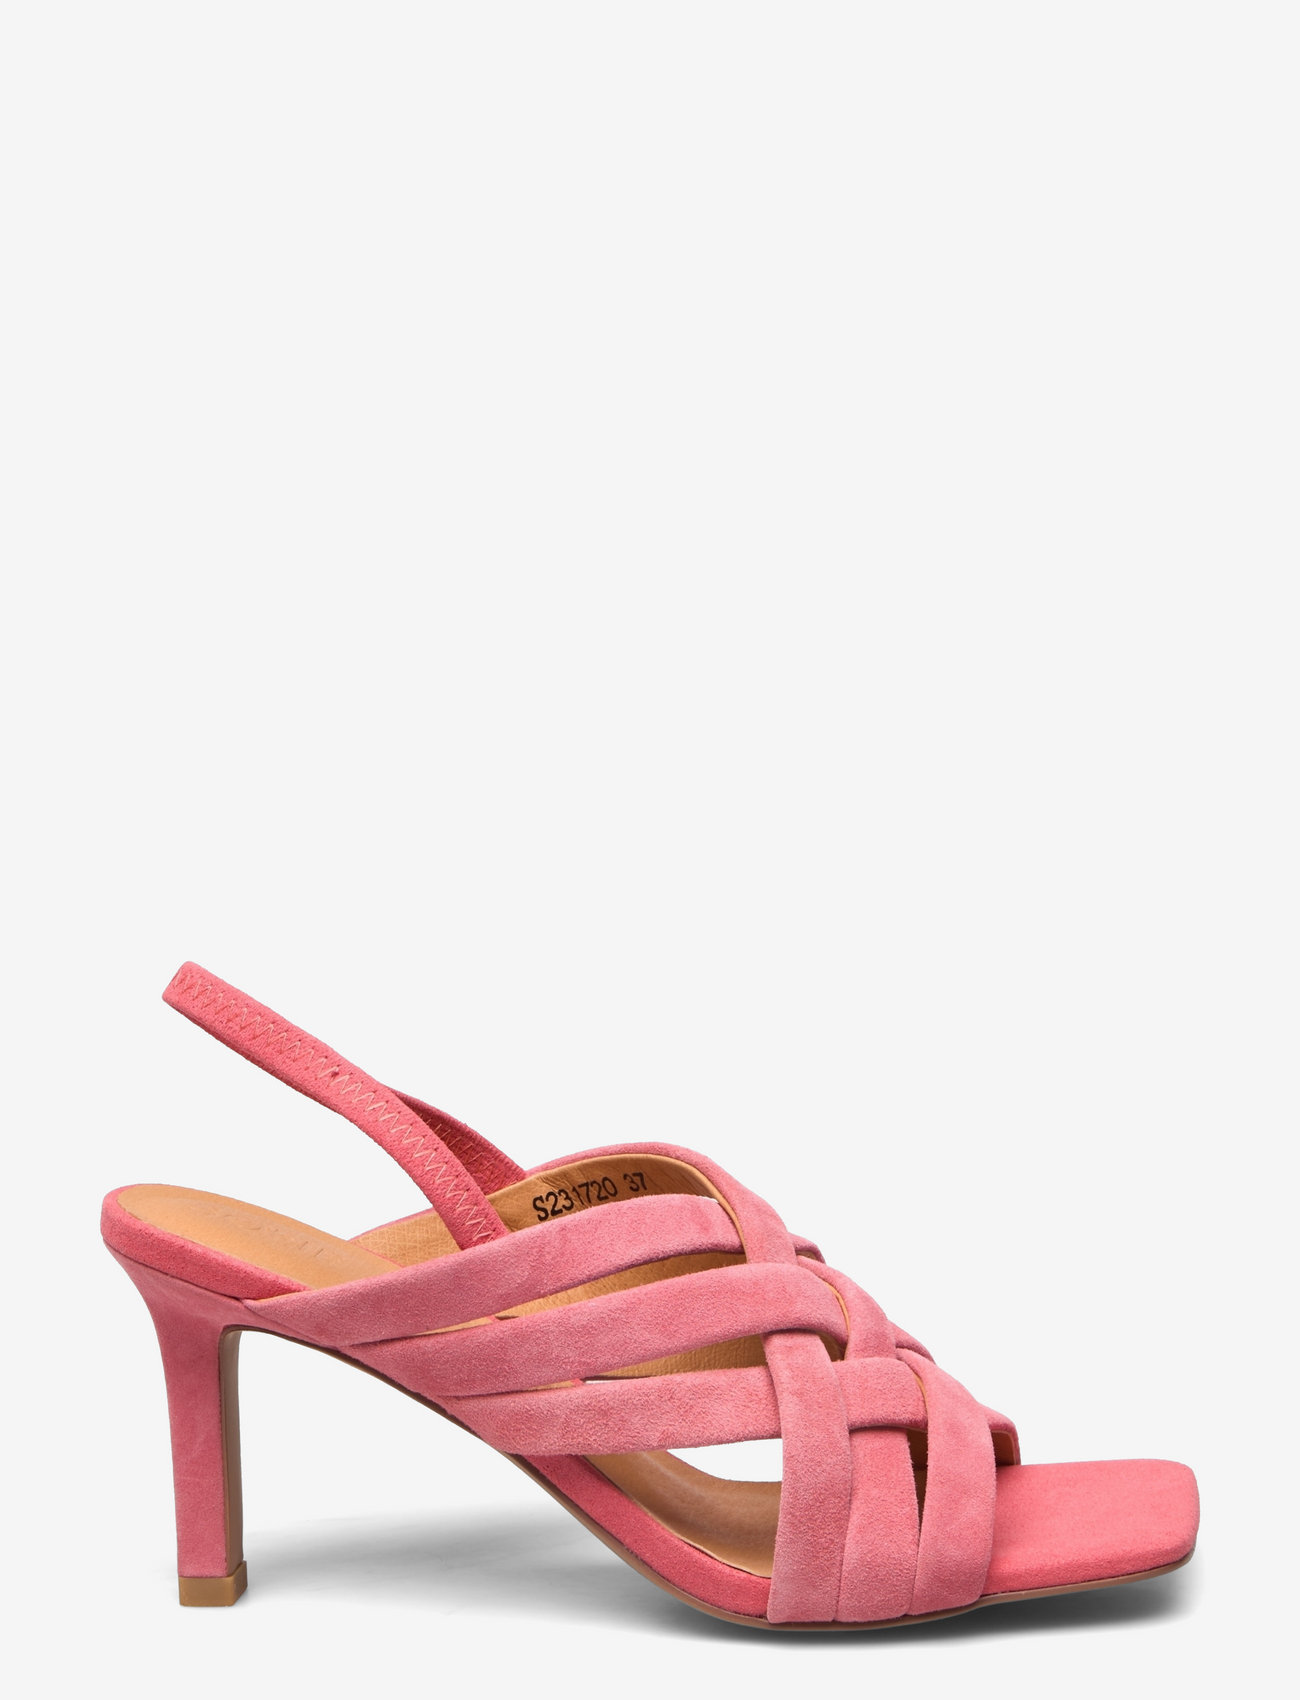 Sofie Schnoor - Stiletto - party wear at outlet prices - bright pink - 1